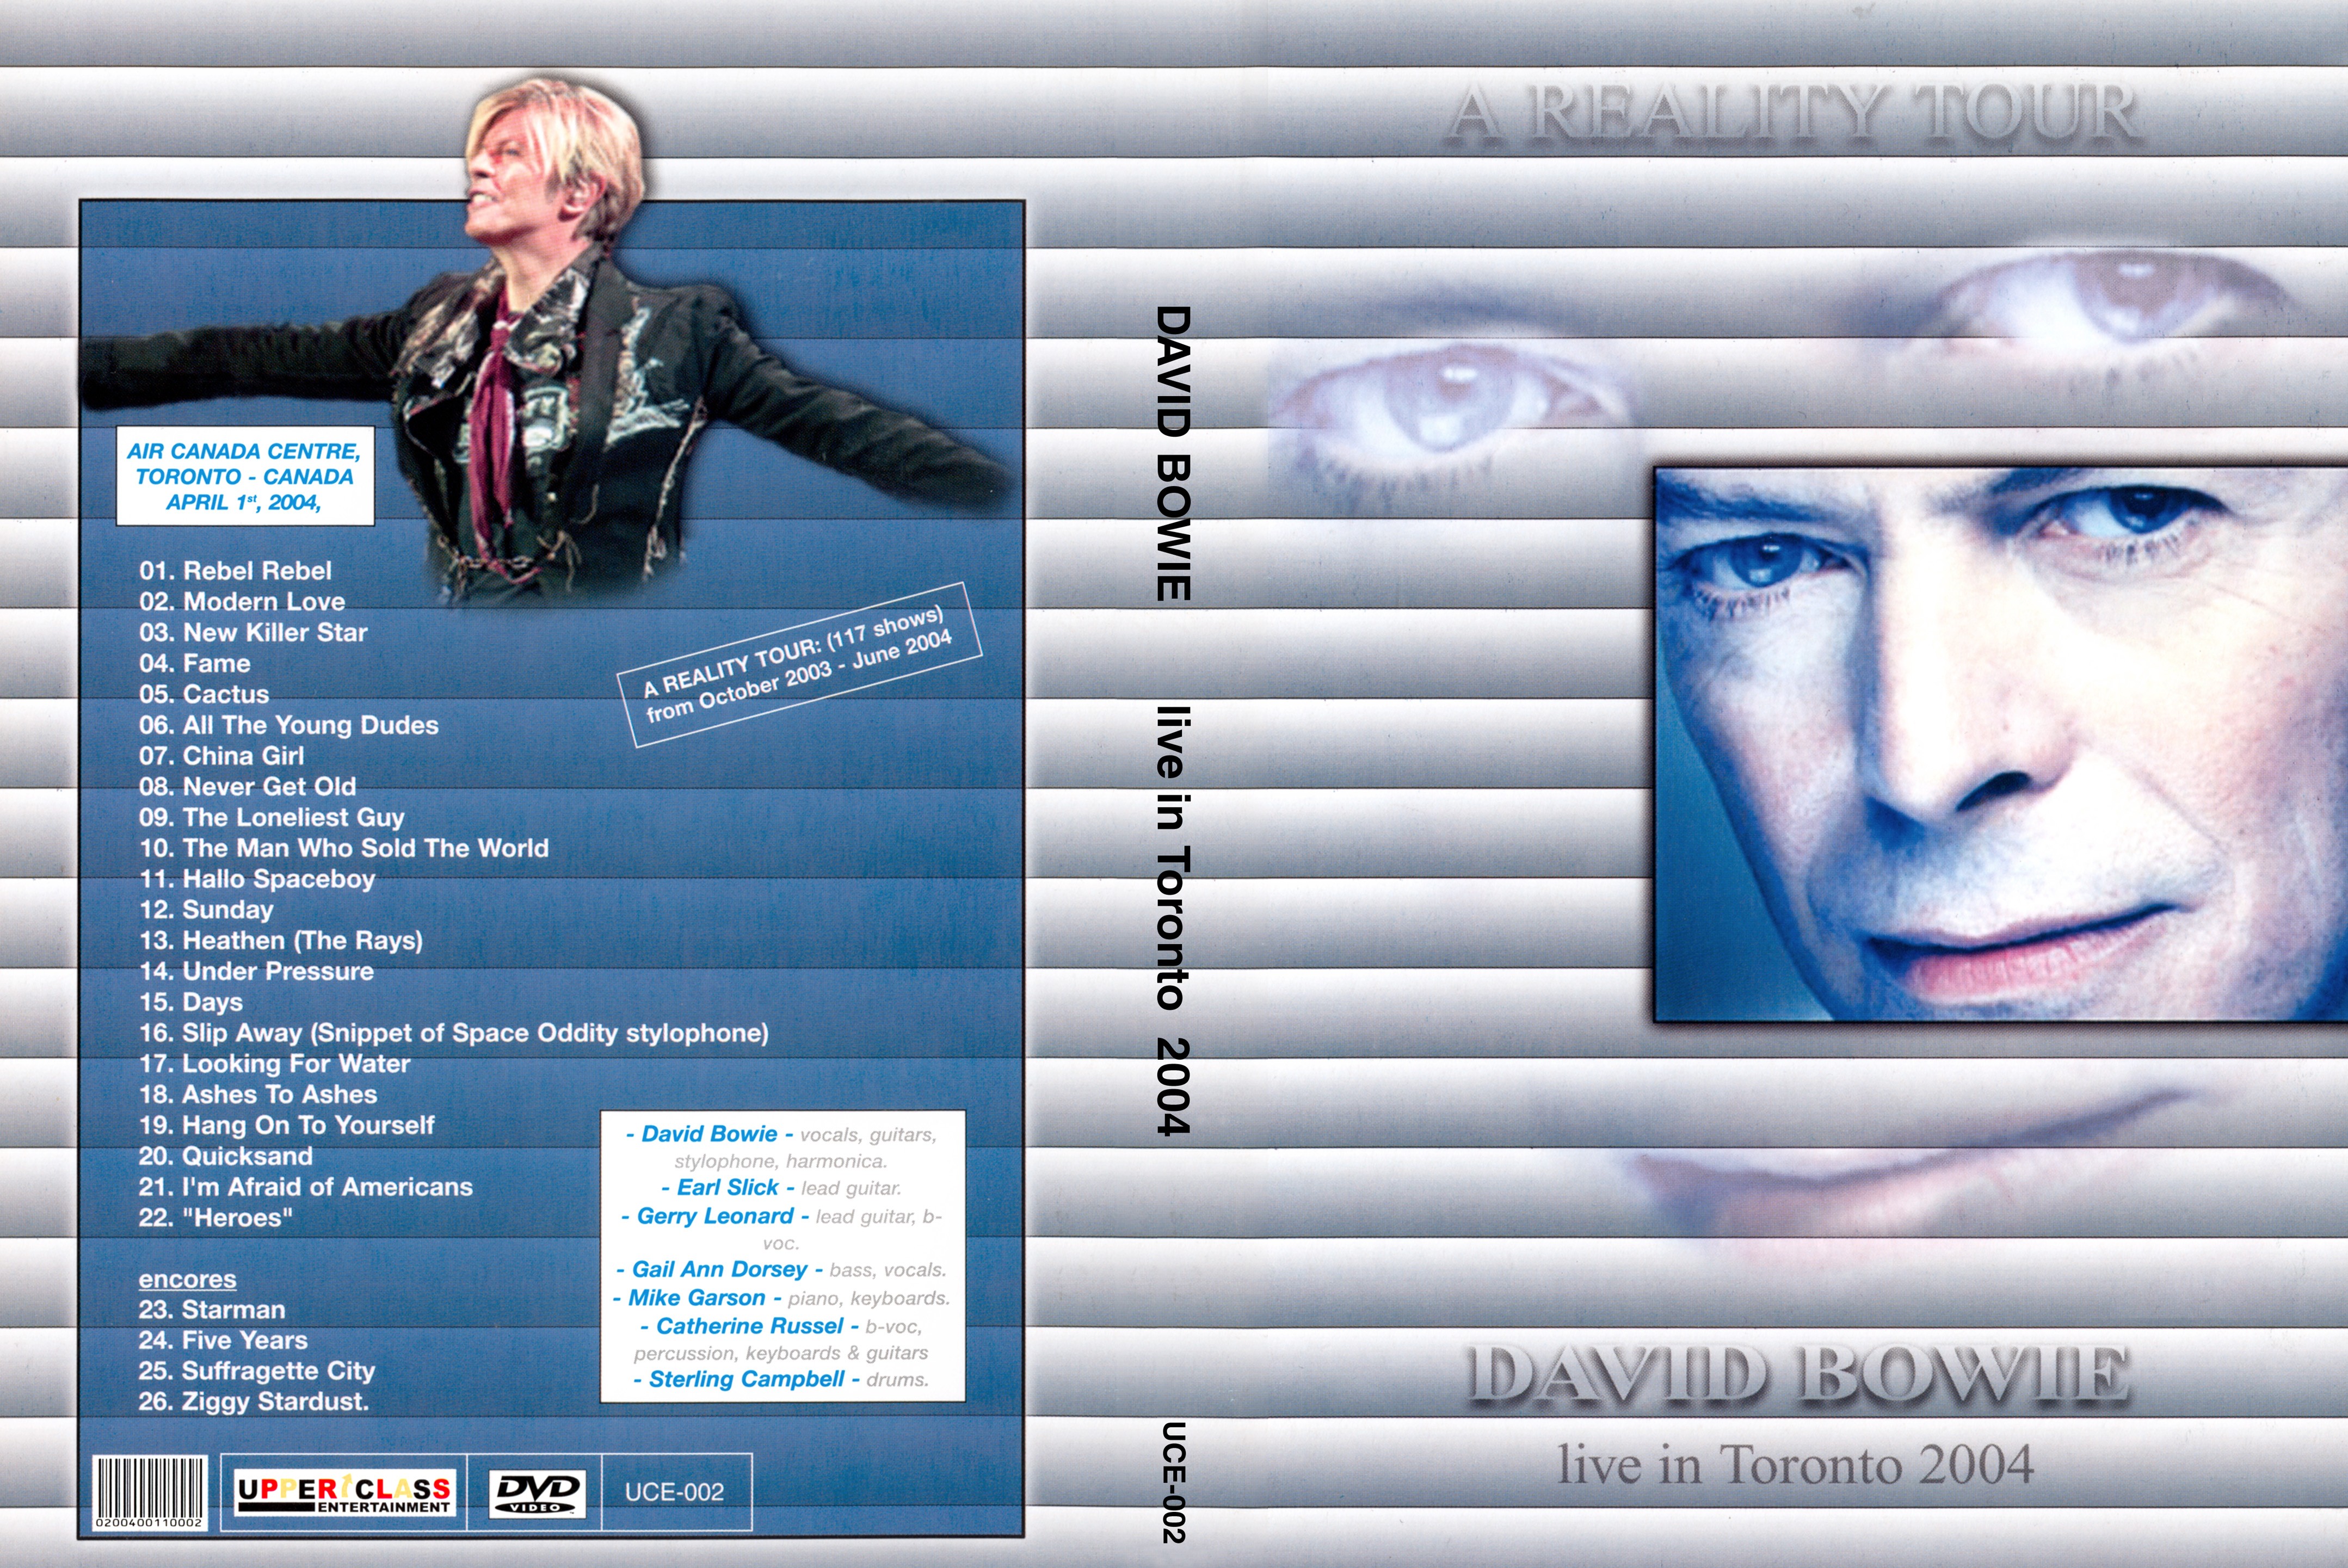 Jaquette DVD David Bowie Live in Toronto 2004